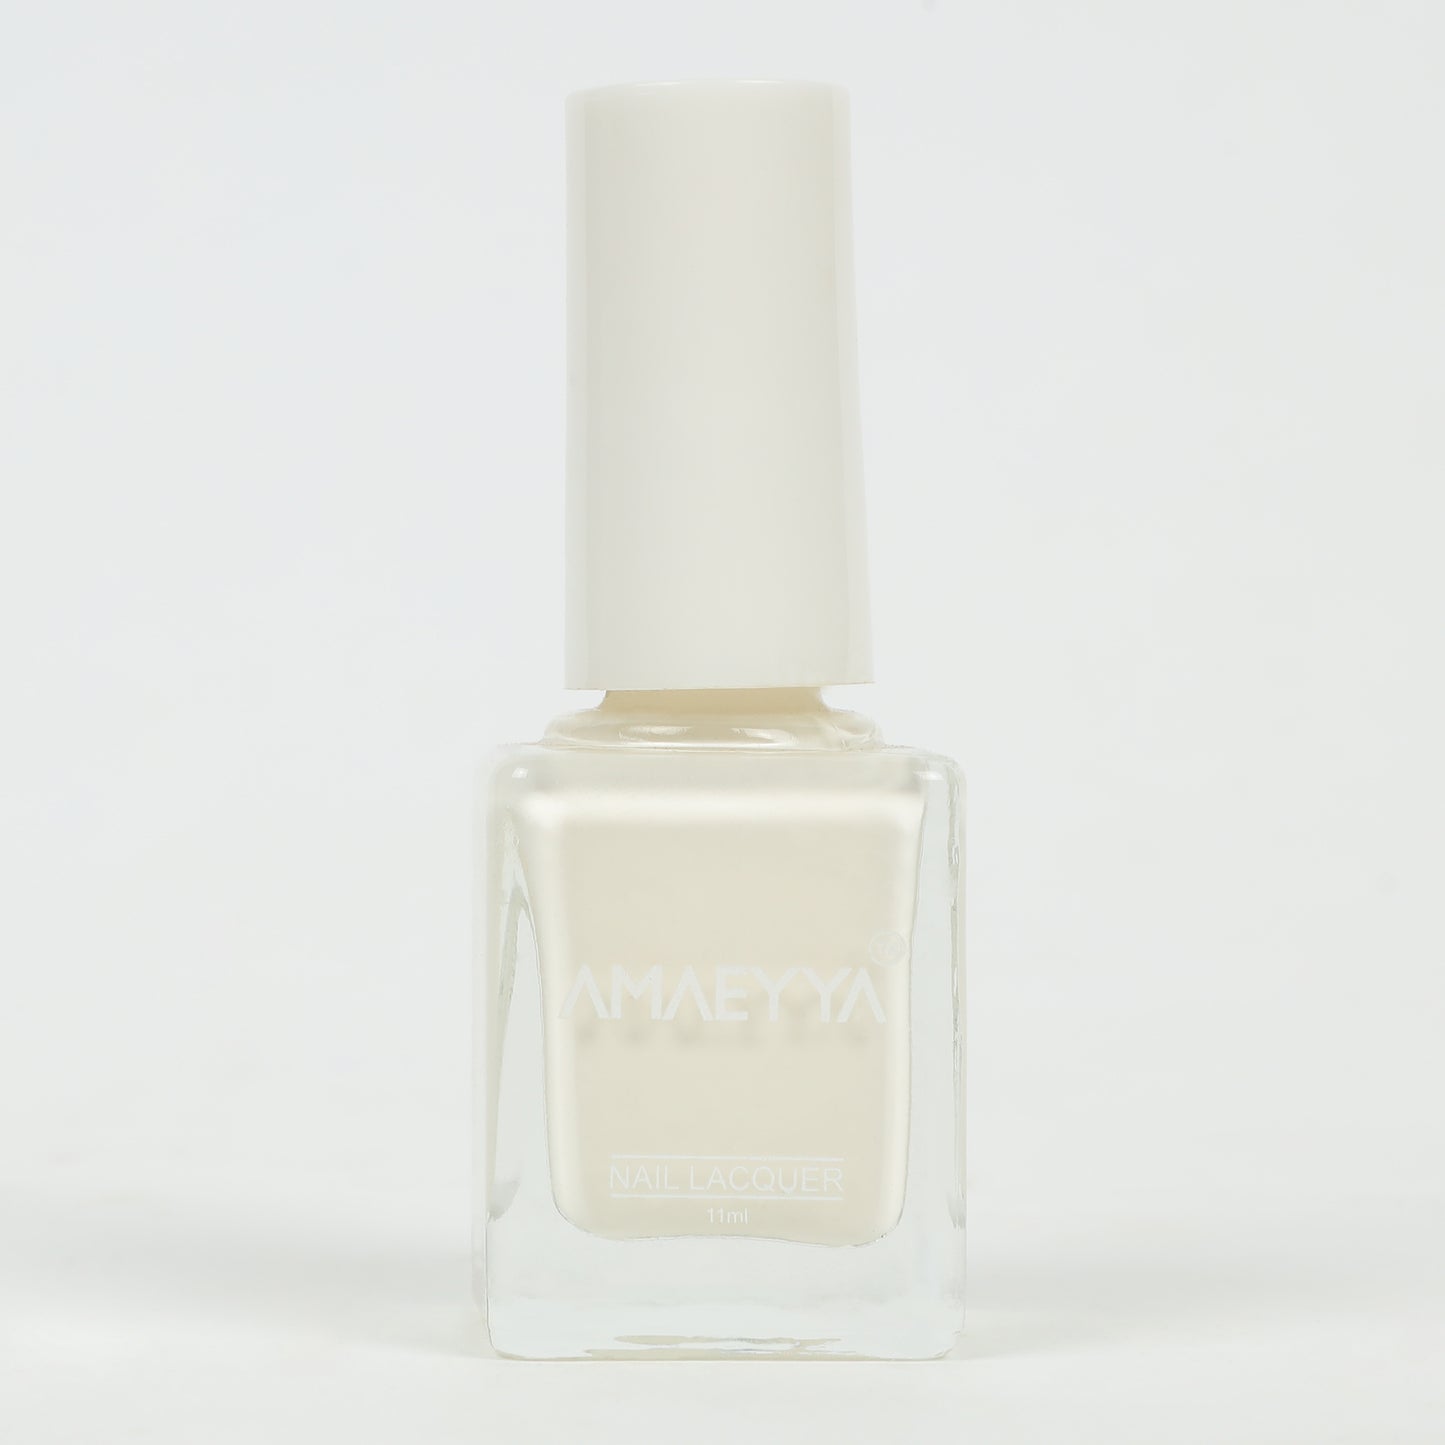 AMAEYYA IVORY FOREVER Nail Lacquer